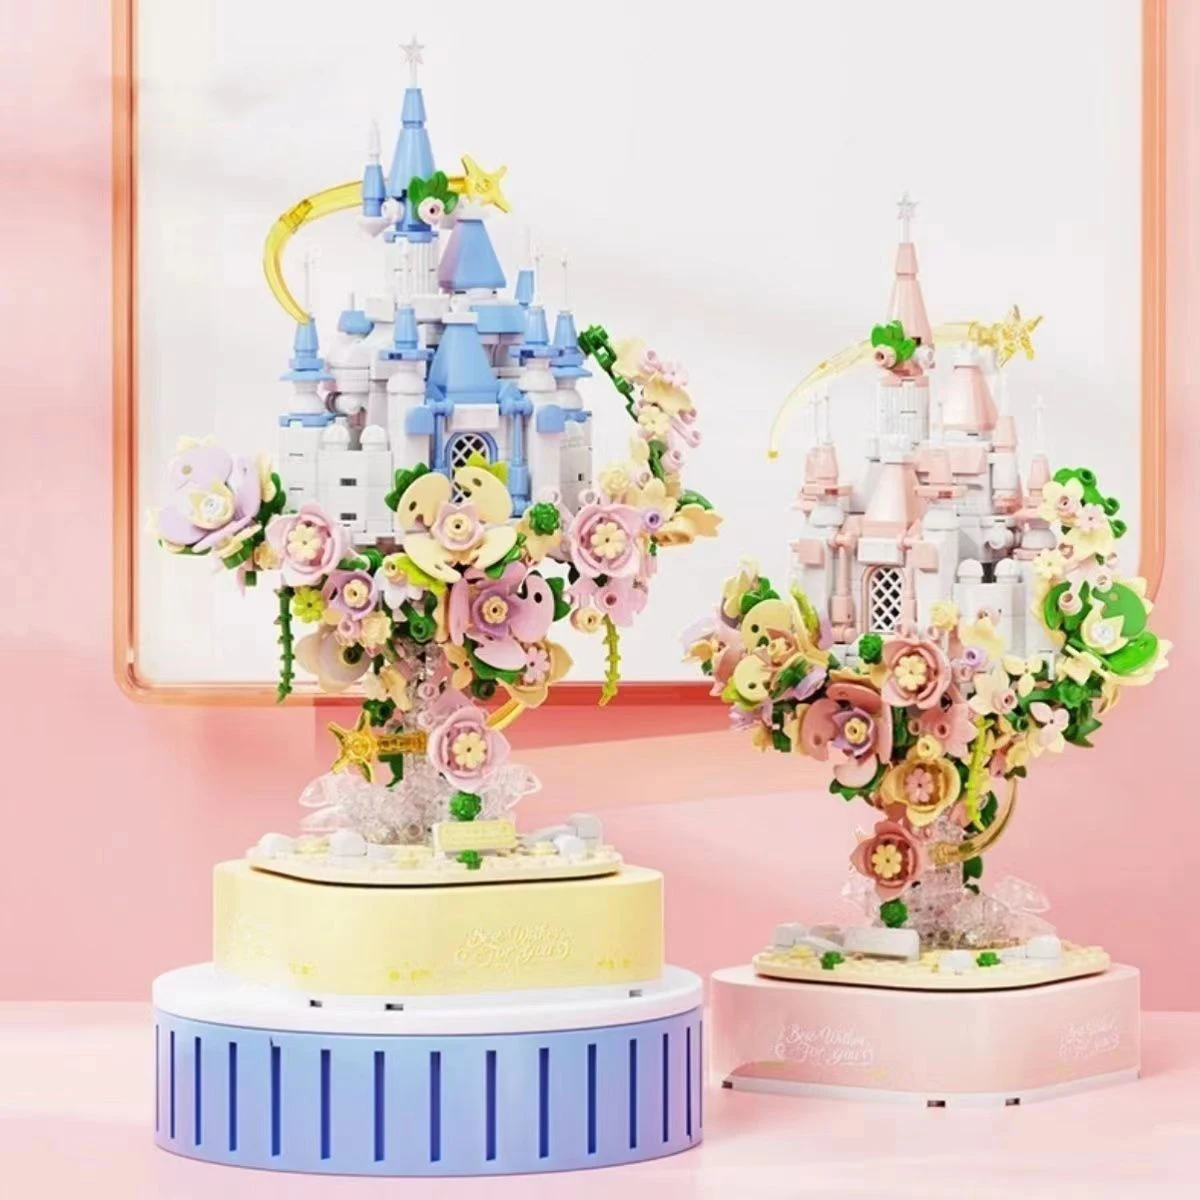 

Creative Princess Flower Castle BuildING Block Fairy Tale Garden Music Box Construction Brick Toy With Light For Girls Gifts